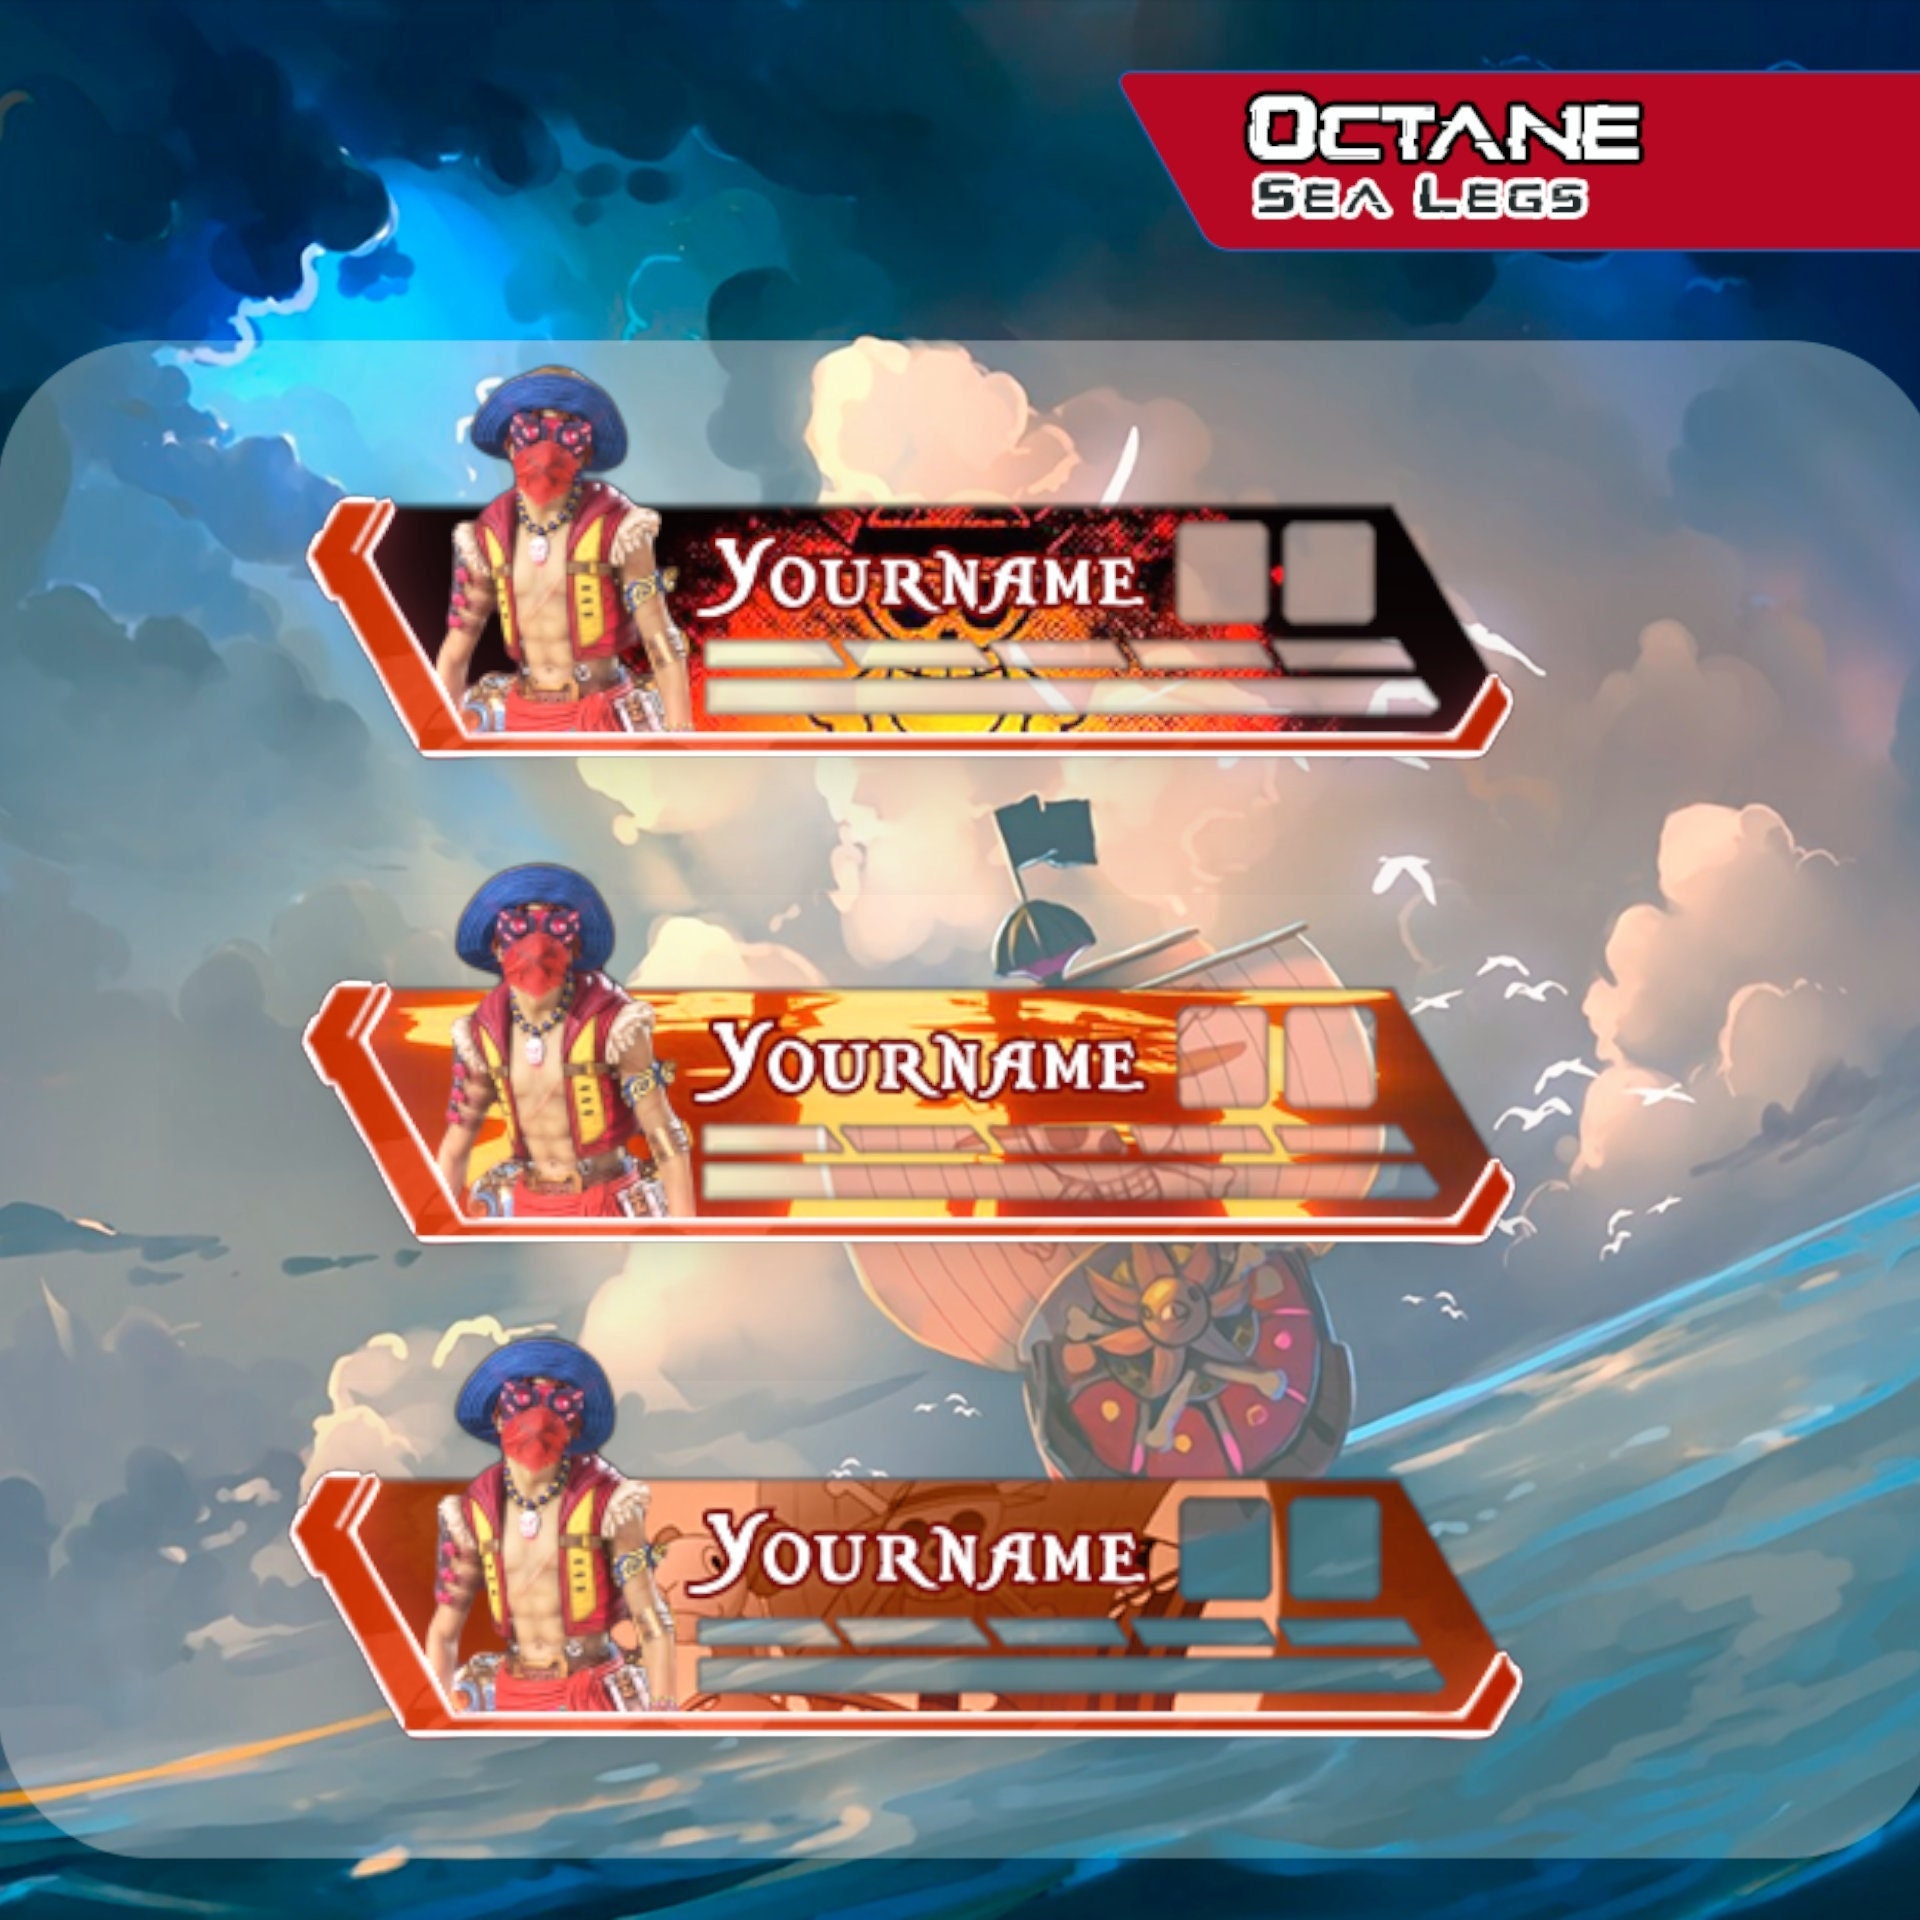 Octane, Sea Legs Health Bar Overlay for Streaming static and Animated - Etsy